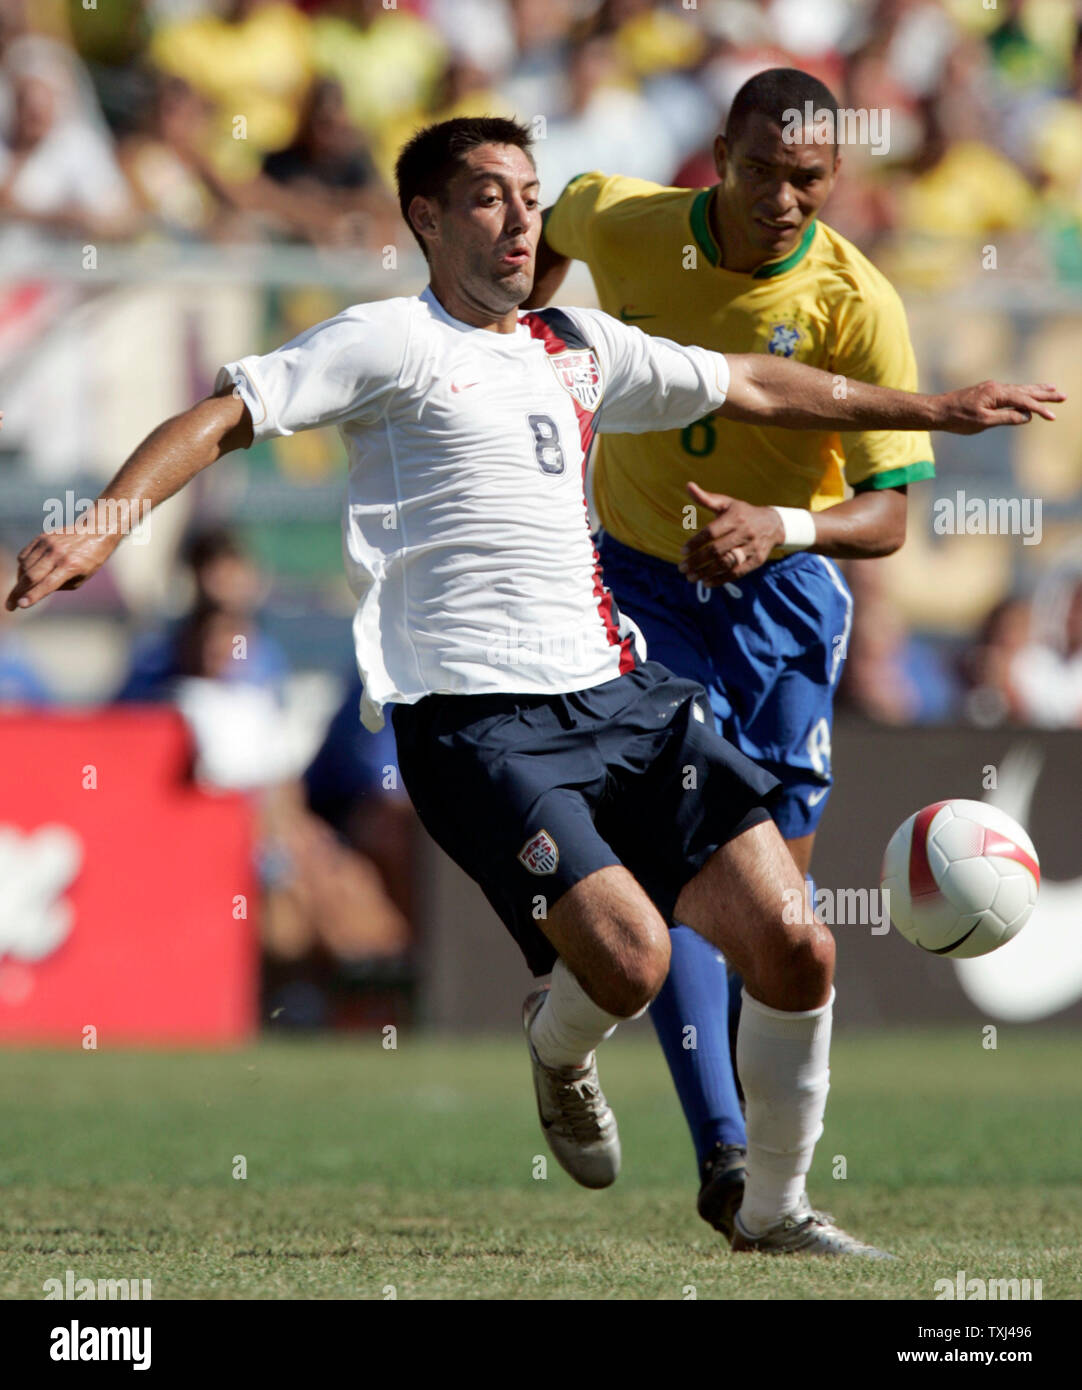 USA forward Clint Dempsey (8) blocks Brazil midfielder Gilberto Silva (R) as he brings the ball upfield. Brazil defeated the USA 4-2 in their international friendly soccer match at Soldier Field in Chicago, September 9, 2007. (UPI Photo/Mark Cowan) Stock Photo